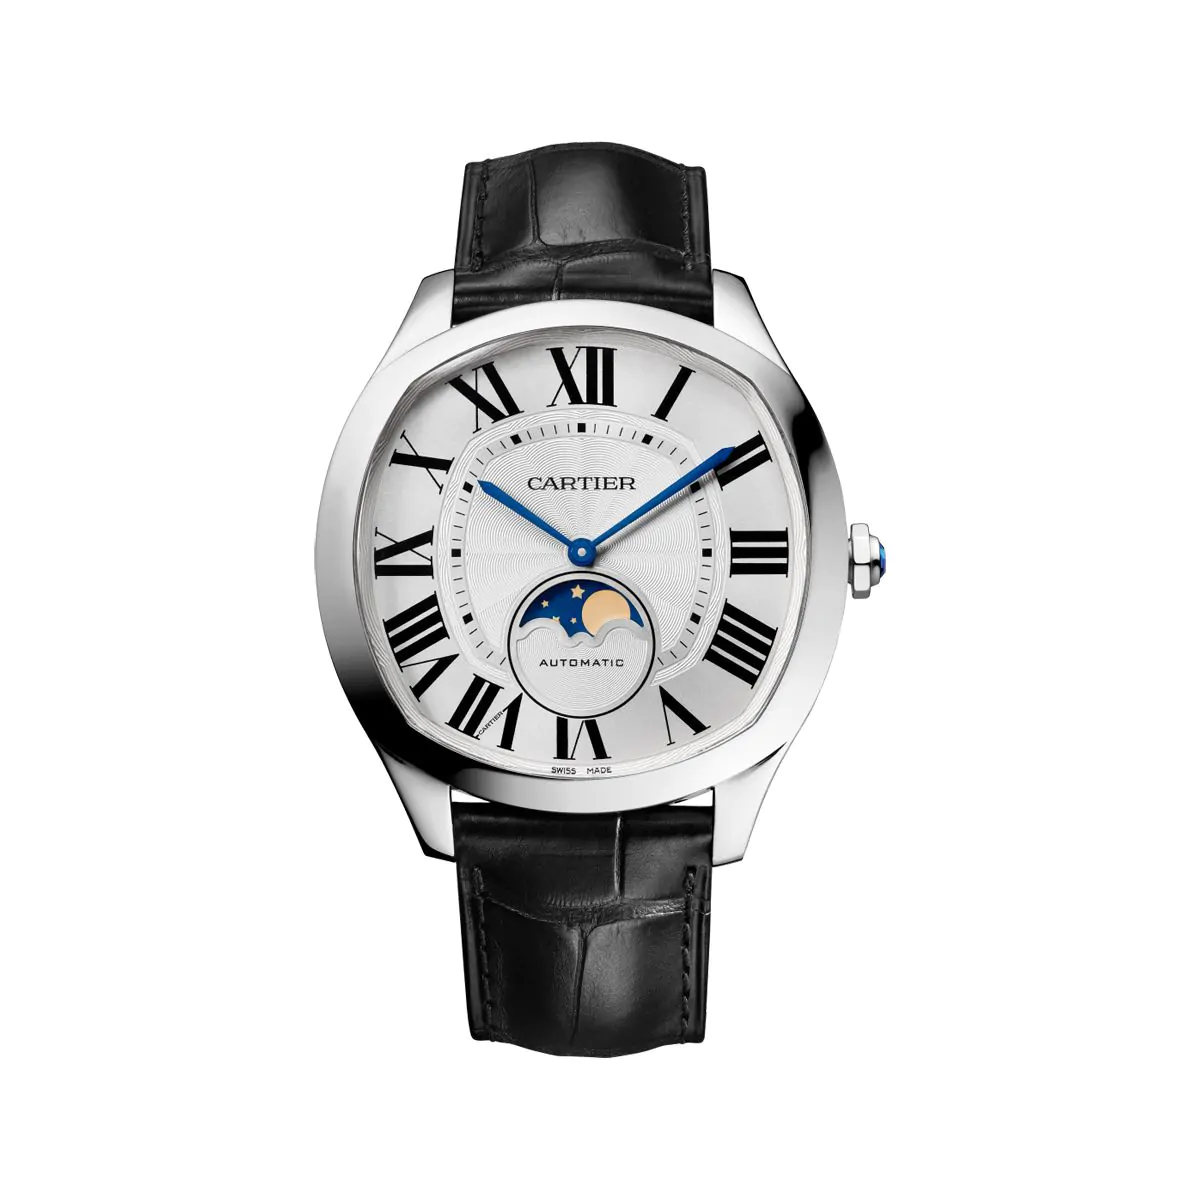 Pre-Owned Drive de Cartier Moon Phase WSNM0008